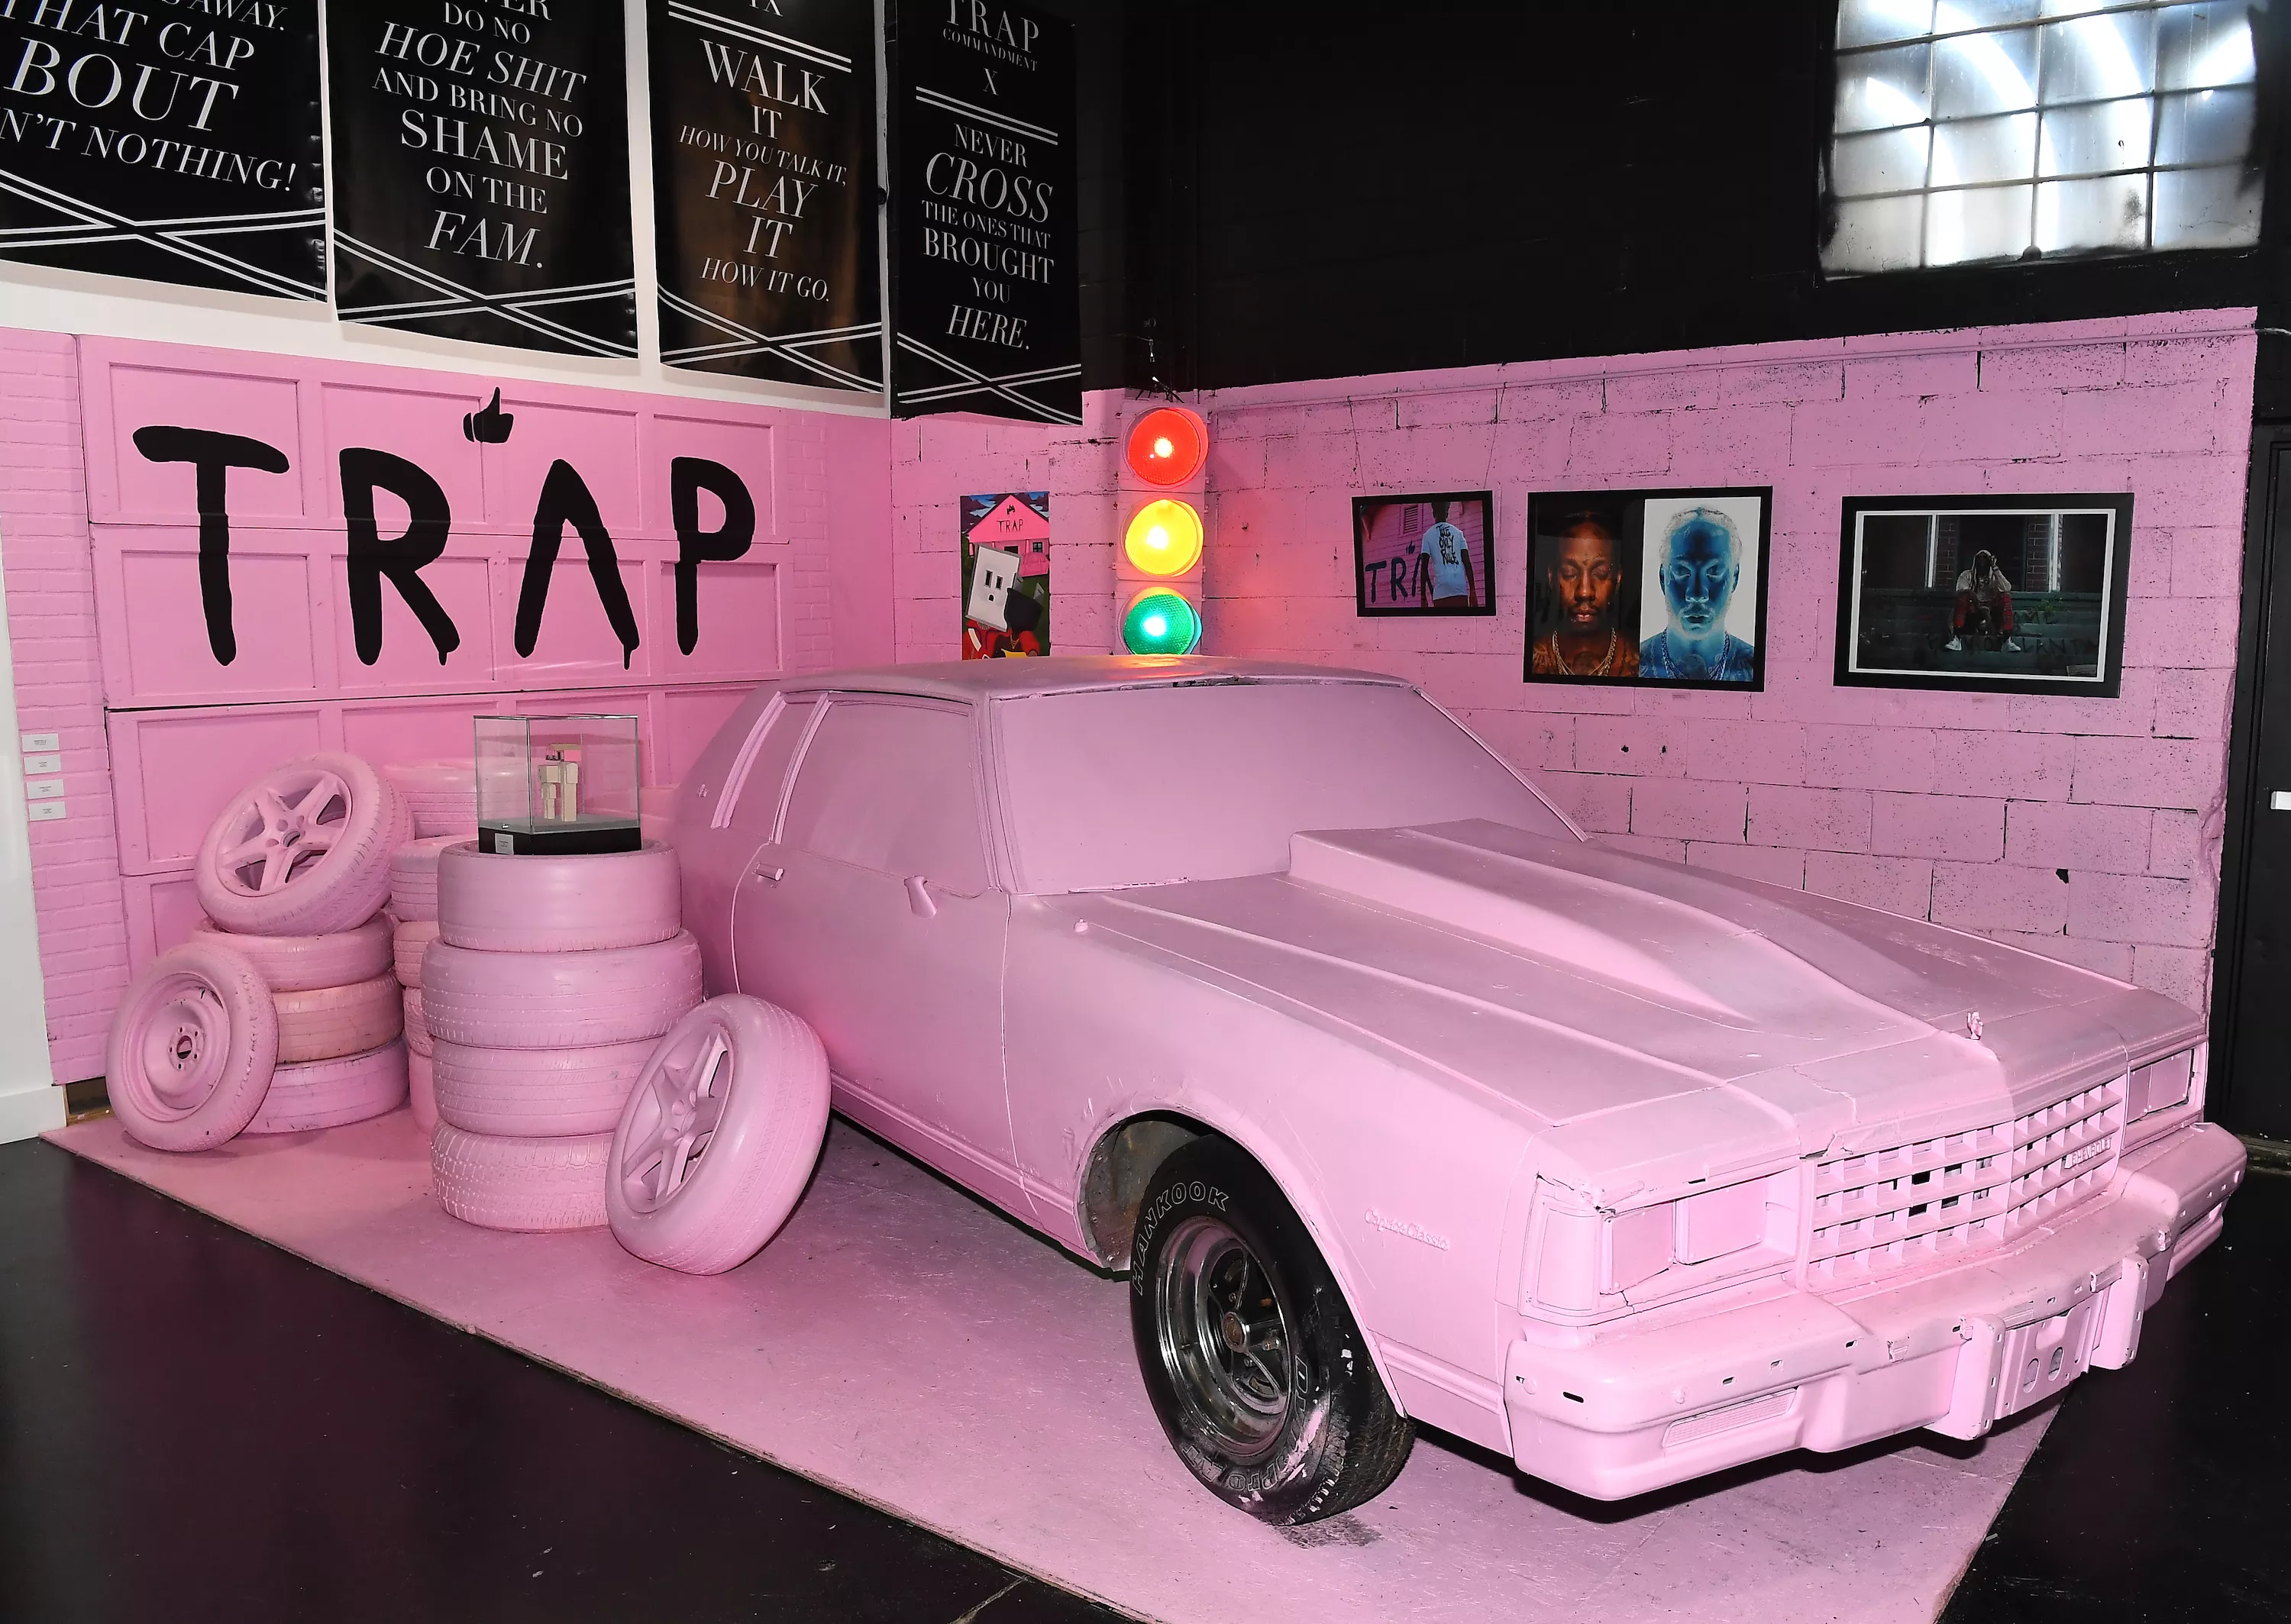 Trap Music Museum in USA, North America | Museums - Rated 3.7